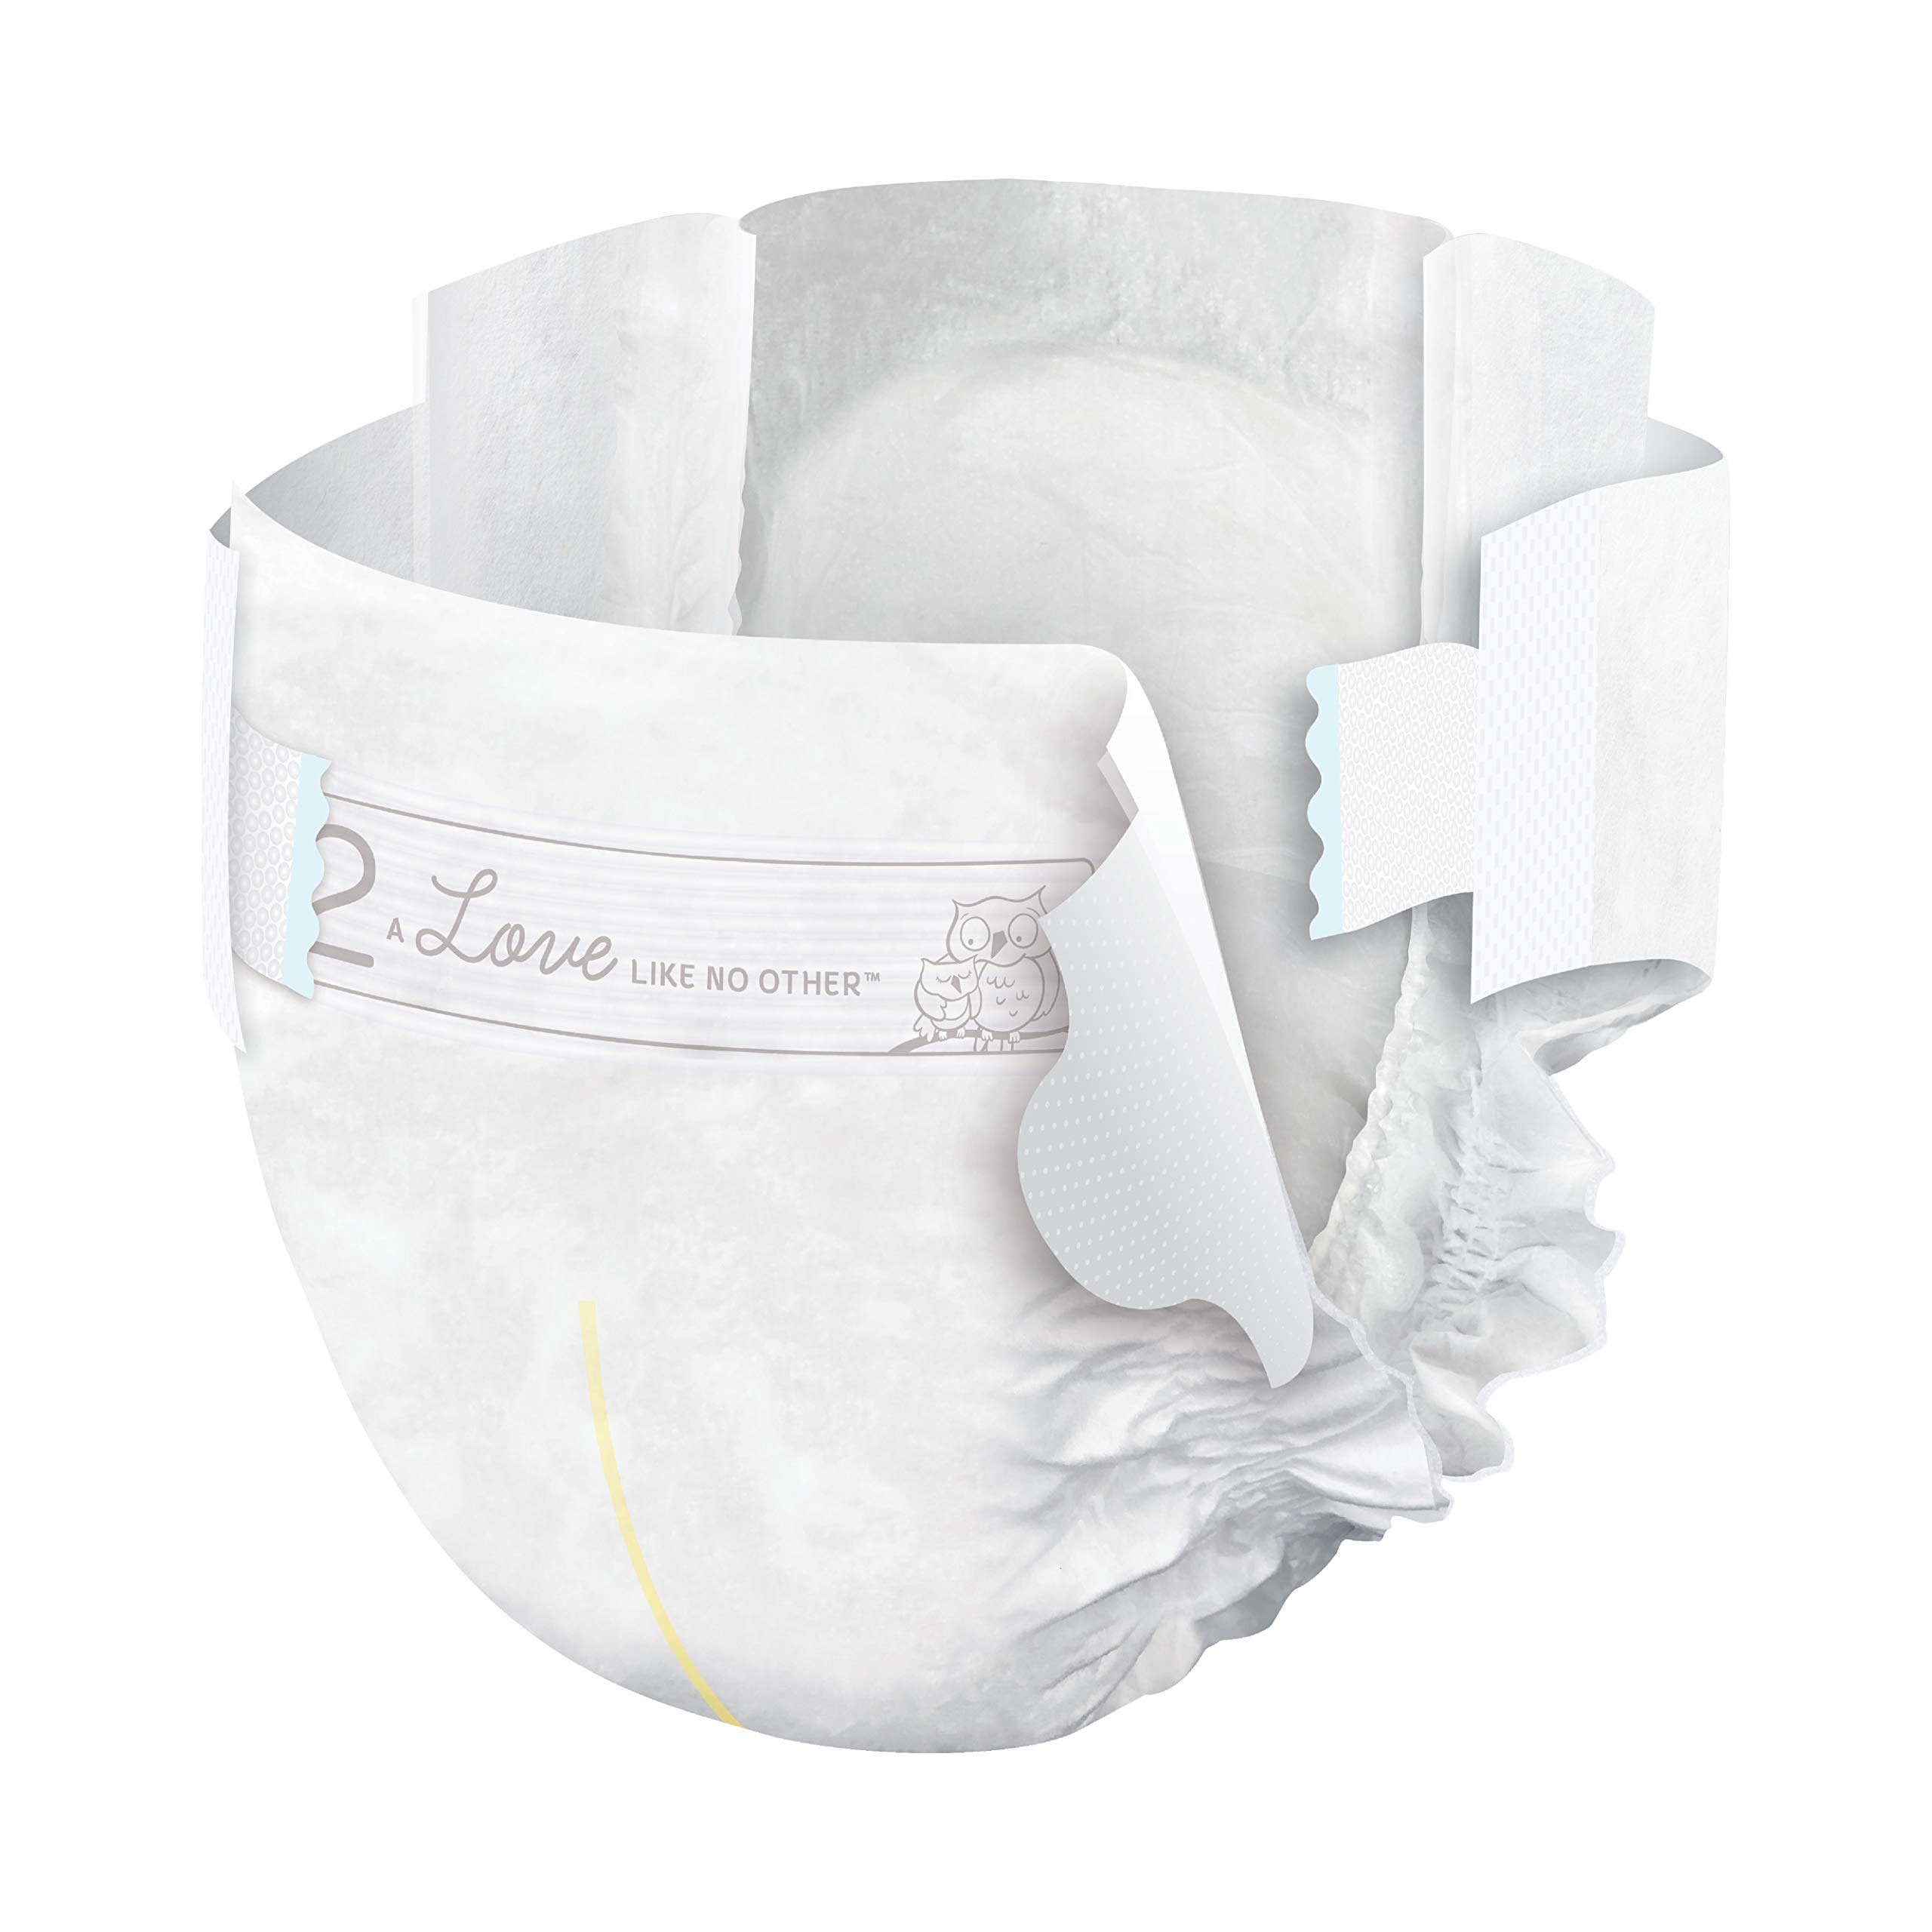 Bambo Nature Premium Eco-Friendly Baby Diapers (SIZES 1 TO 6 AVAILABLE), Size 2, 192 Count